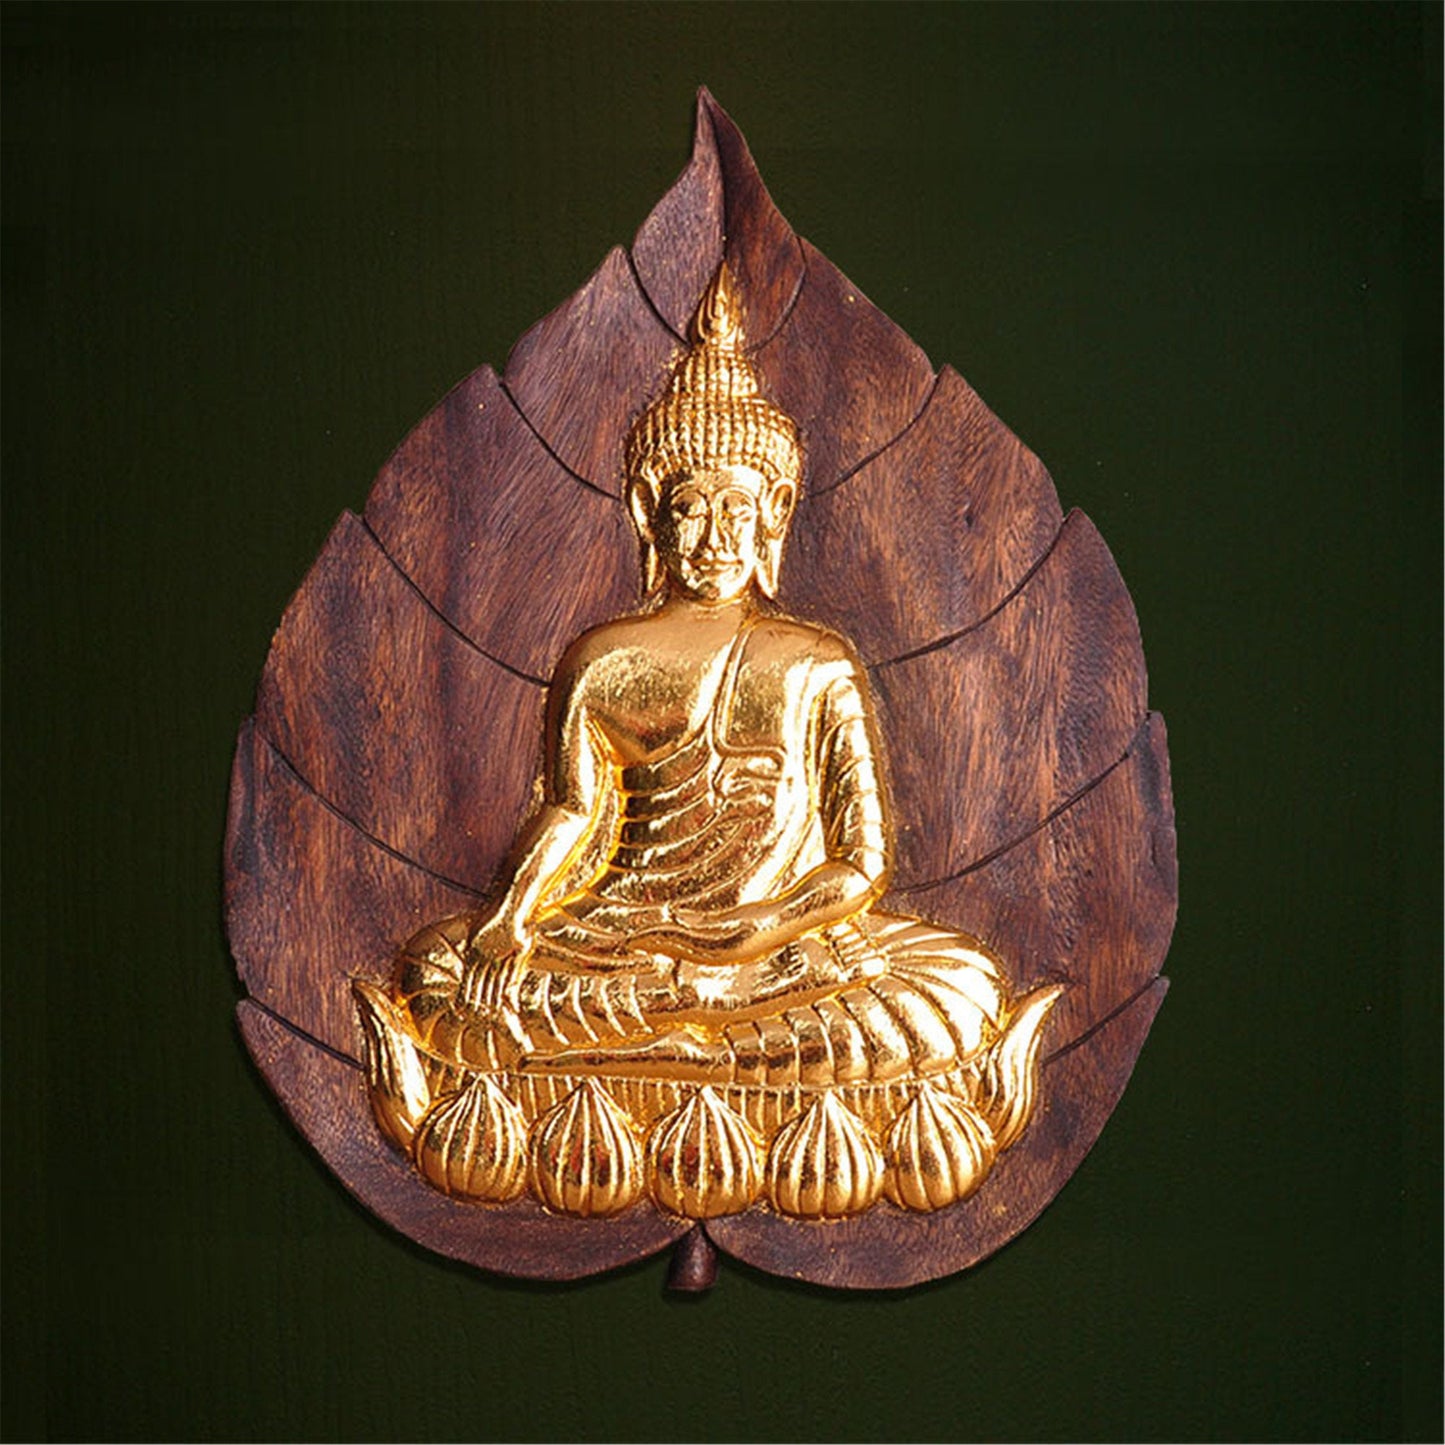 Gandhanra Tantric Buddhism Buddha Statue,Made with Teak Carving and Gilding,For Home Decor,Wall Hanging,Meditation,Handmade in Thailand